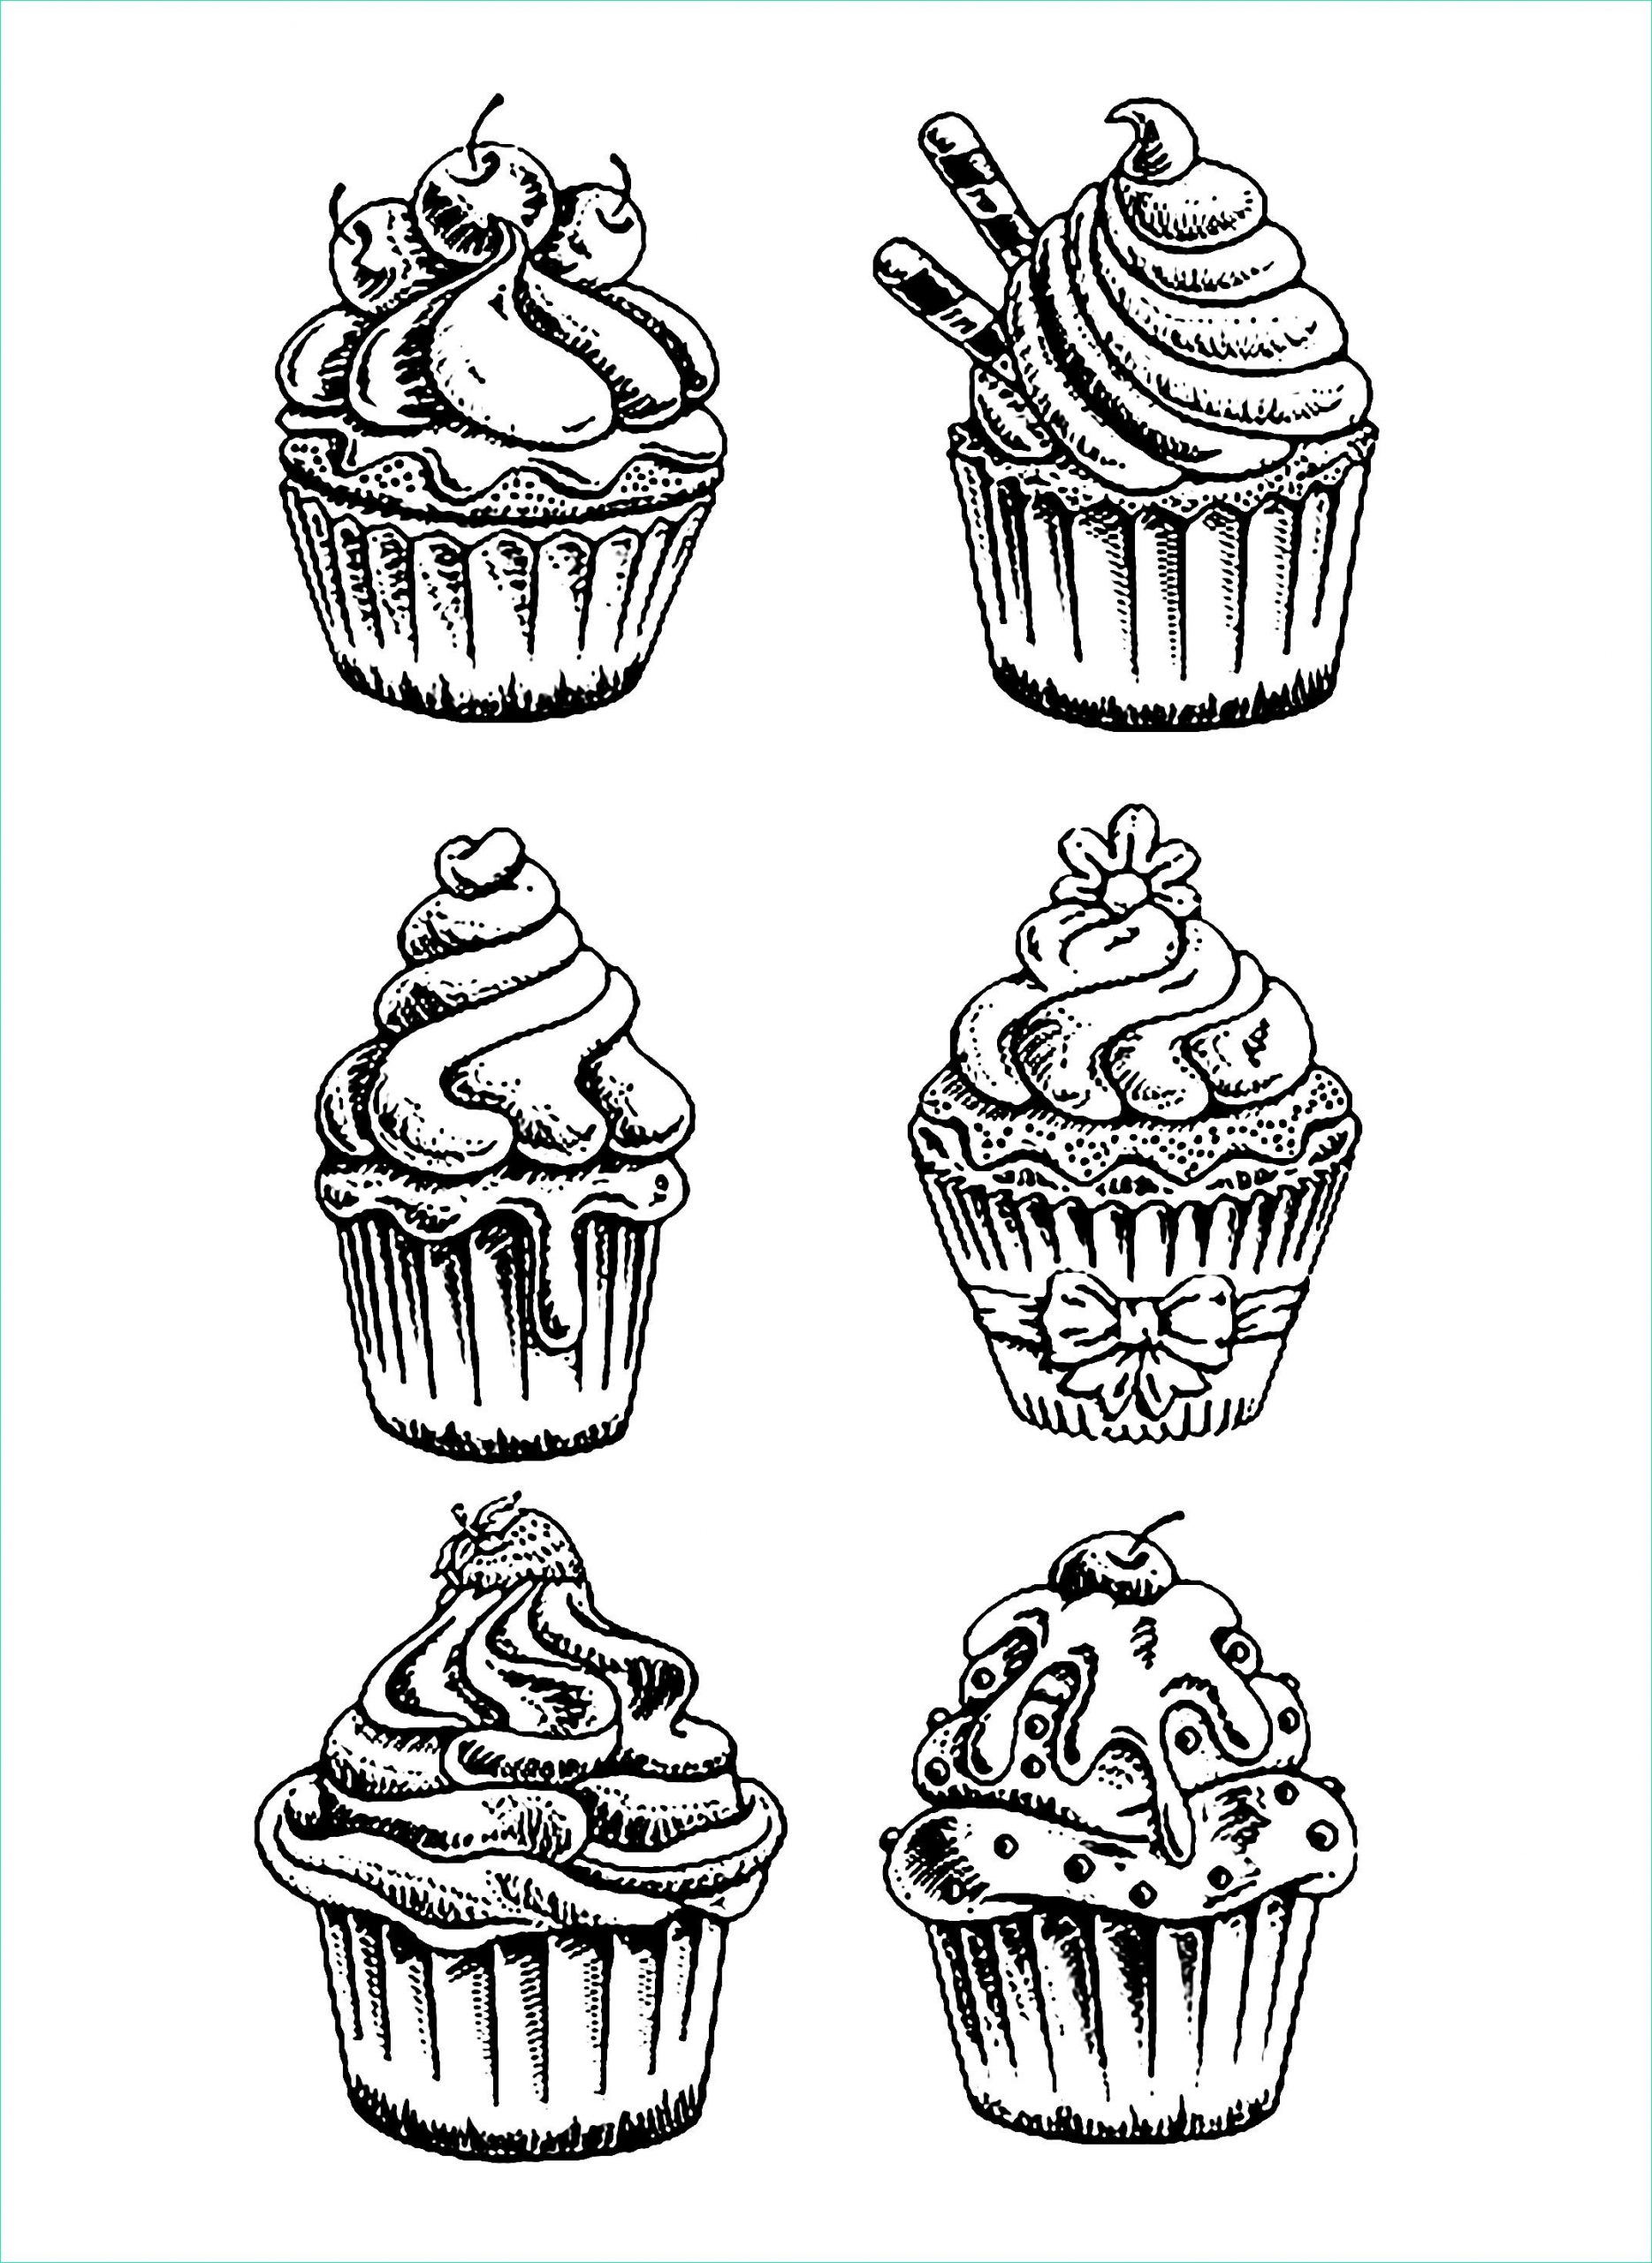 image=cup cakes coloring page six good cupcakes 1